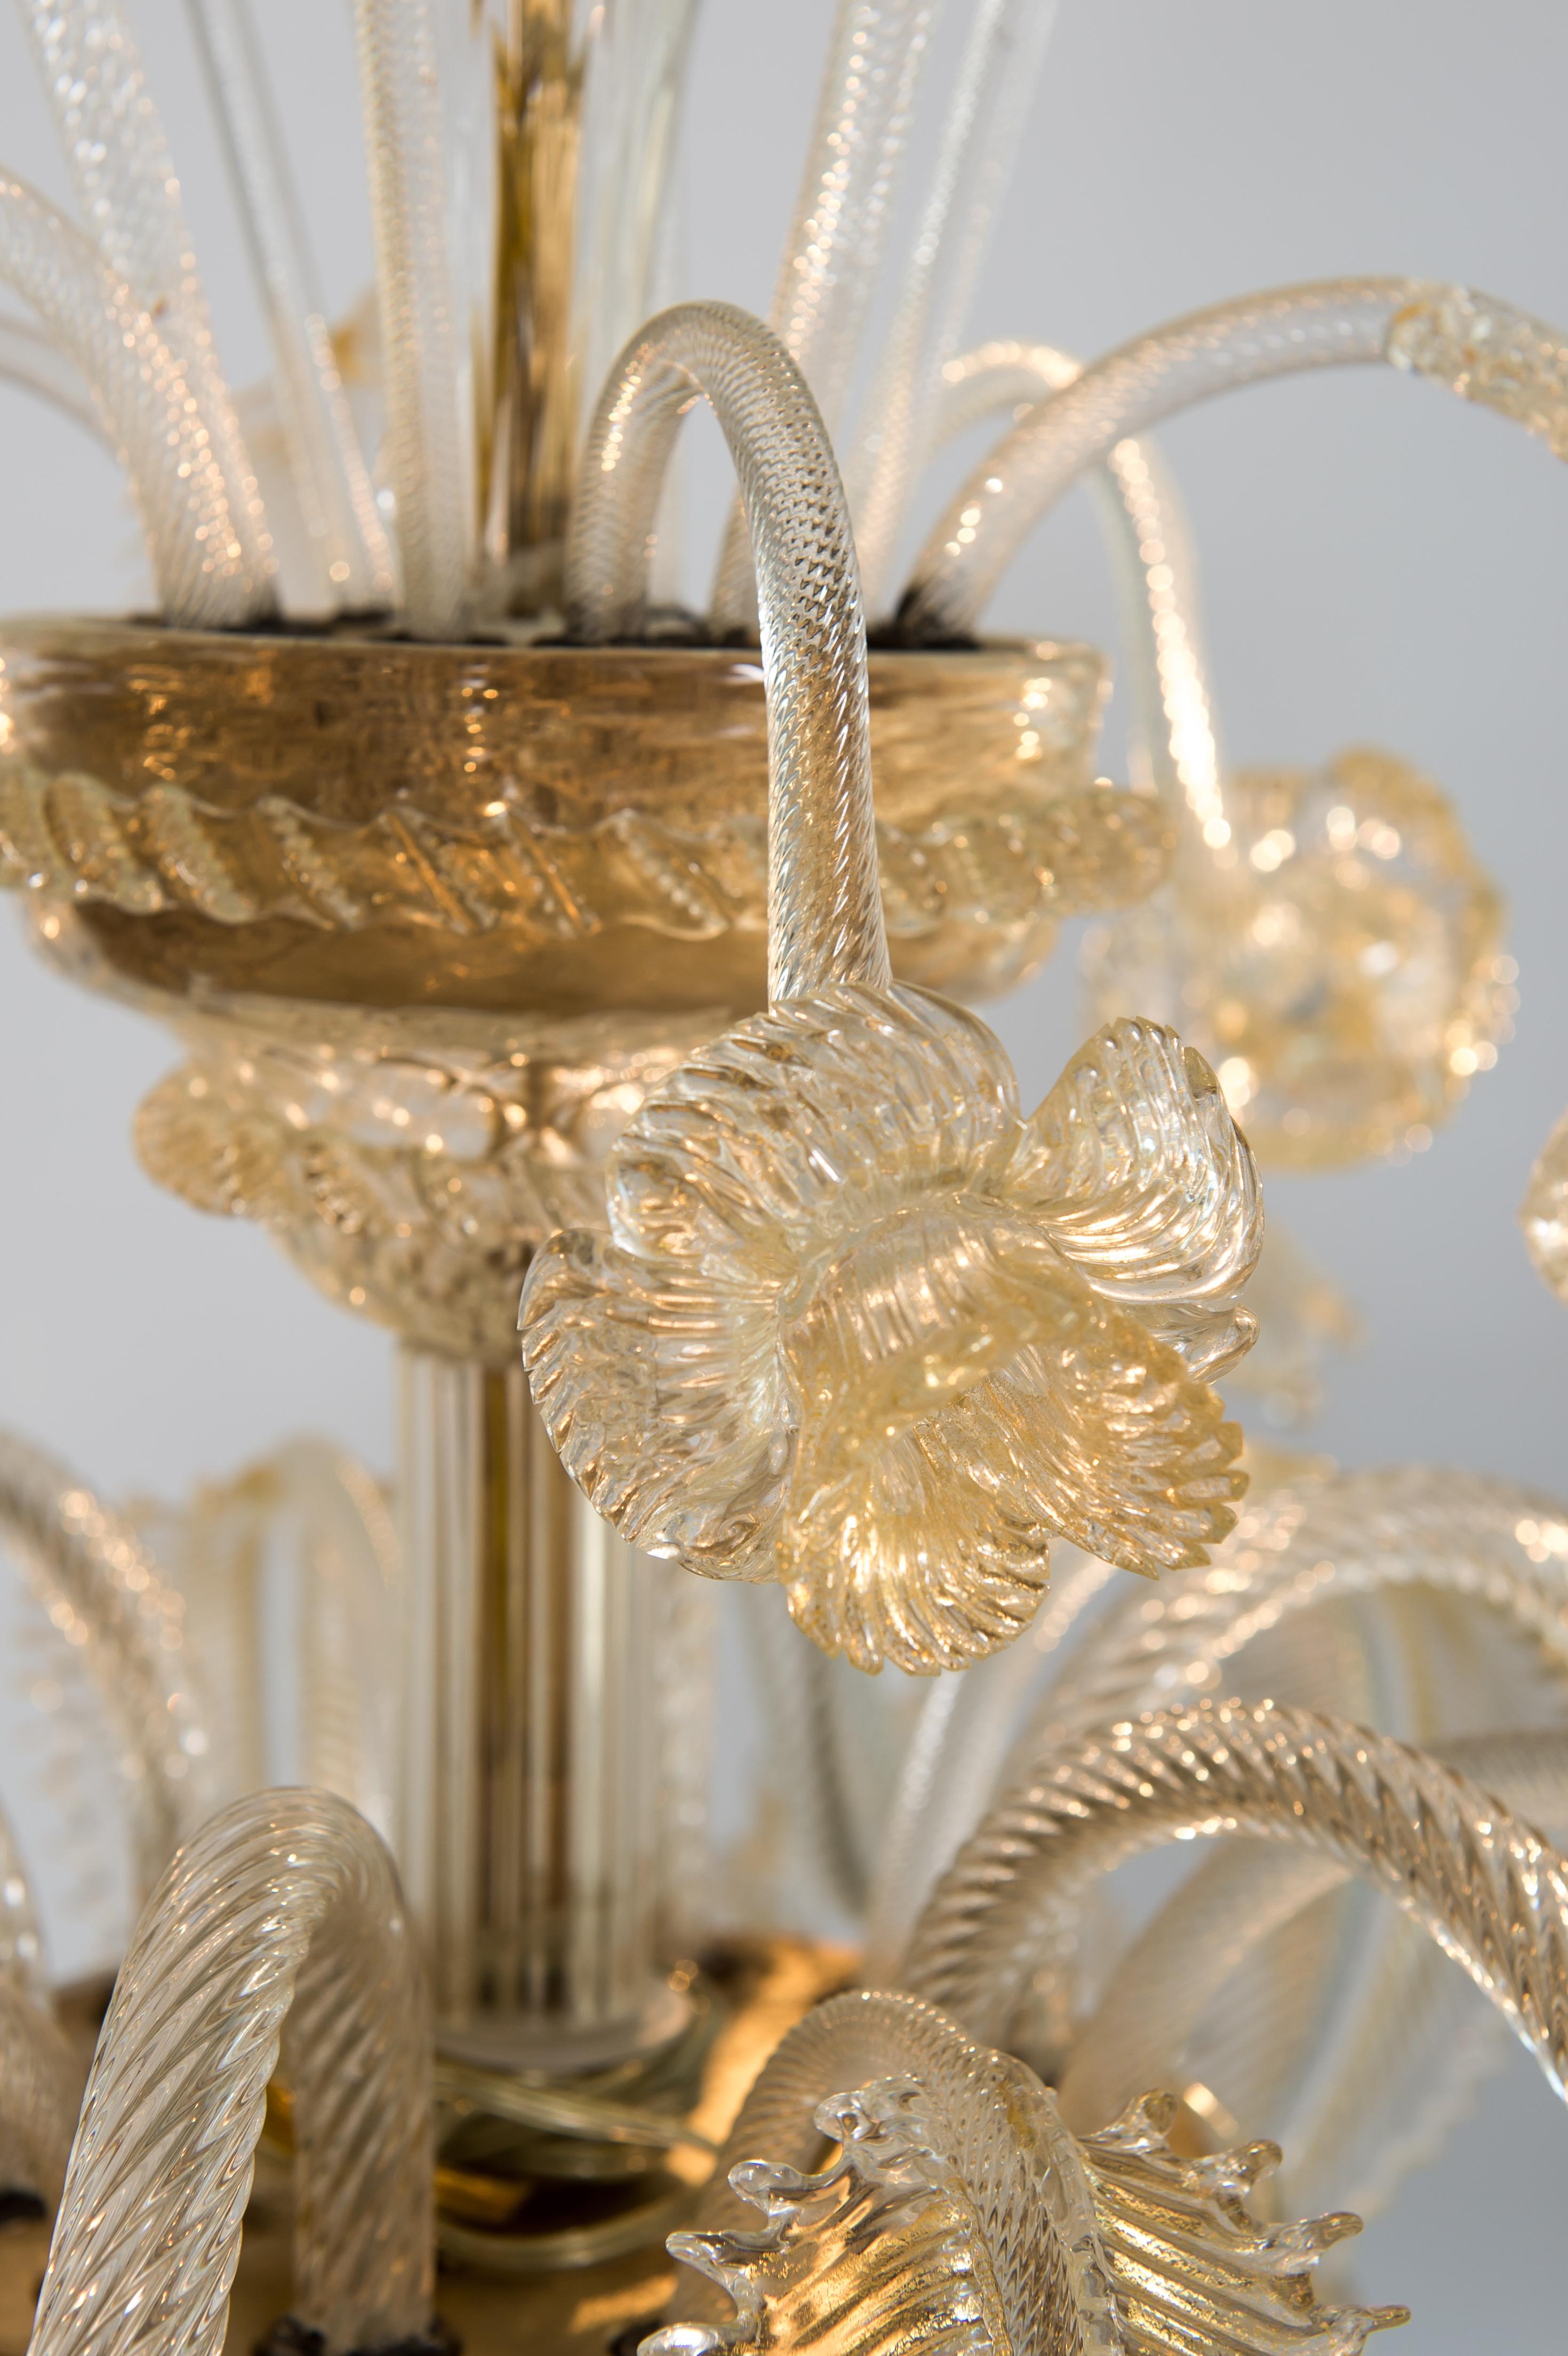 Floral Murano Glass Chandelier with “Riga Dritta” Decorations, 20th Century 11